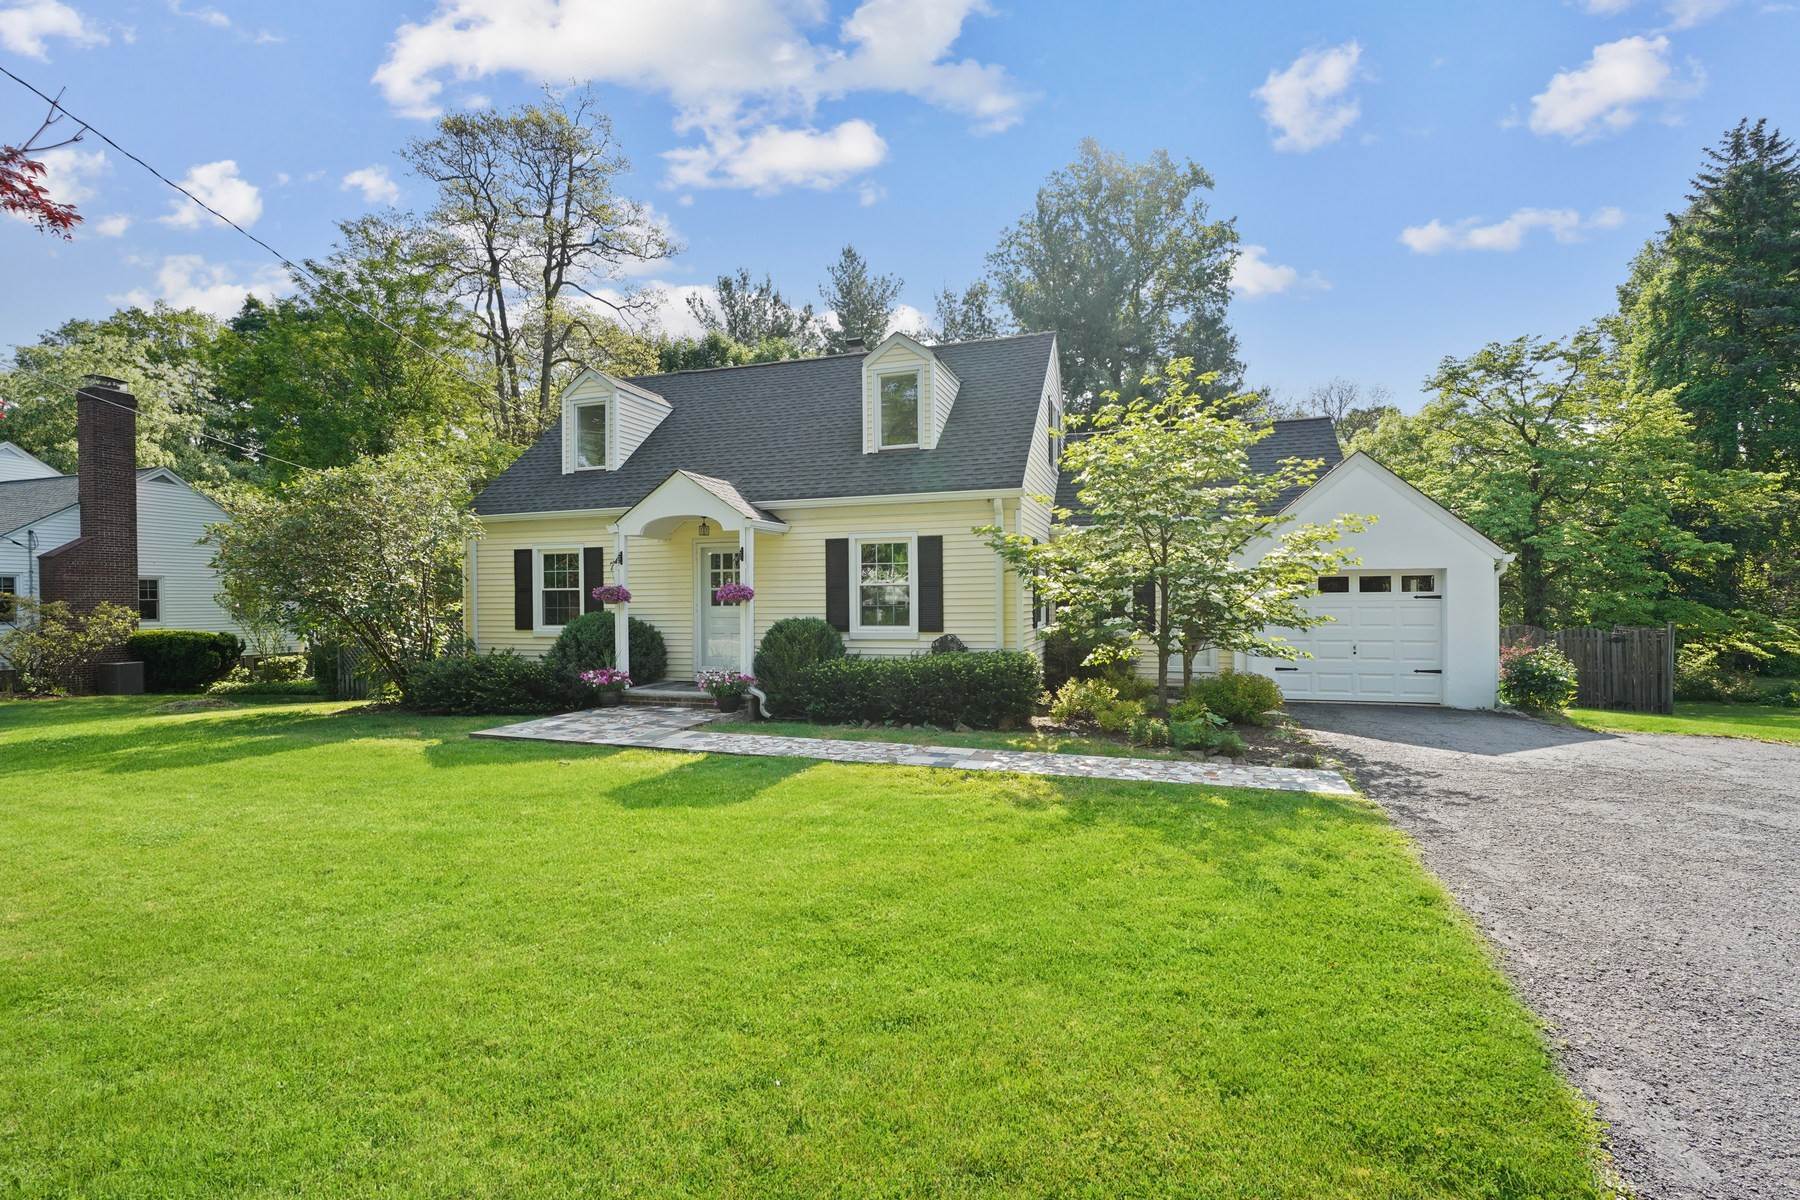 Single Family Homes for Sale at Pristine Cape Cod 150 Mount Airy Road Bernardsville, New Jersey 07924 United States